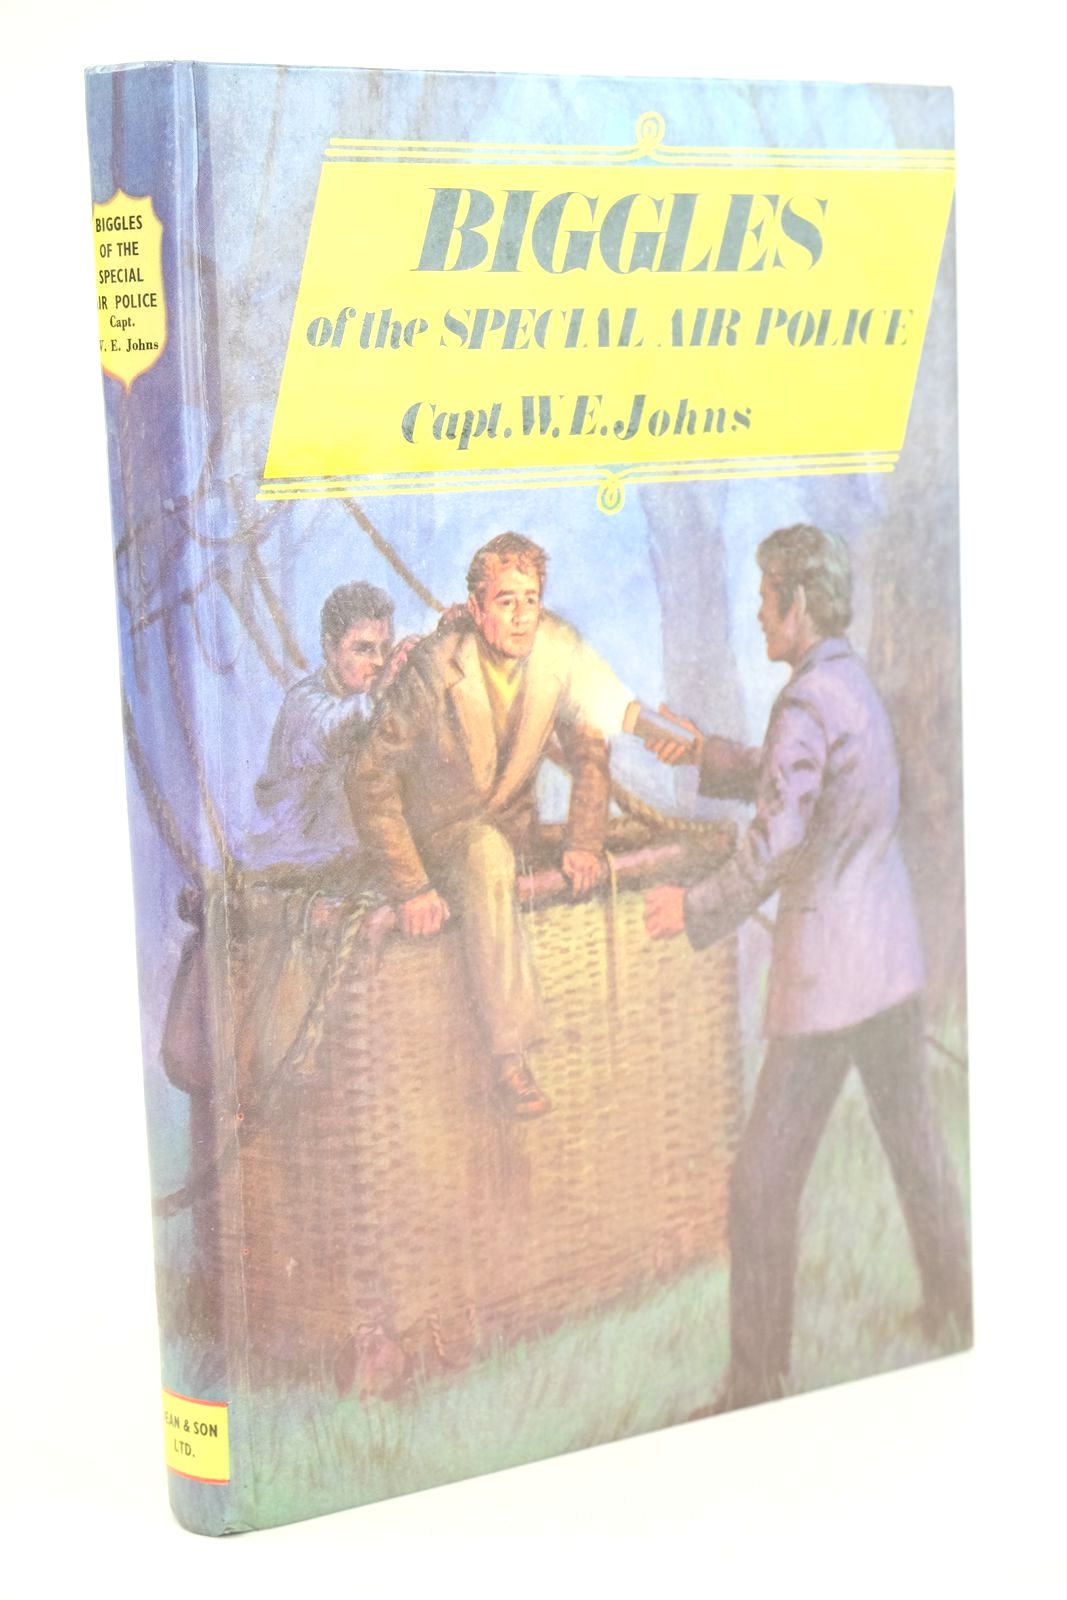 Photo of BIGGLES OF THE SPECIAL AIR POLICE written by Johns, W.E. published by Dean &amp; Son Ltd. (STOCK CODE: 1323891)  for sale by Stella & Rose's Books